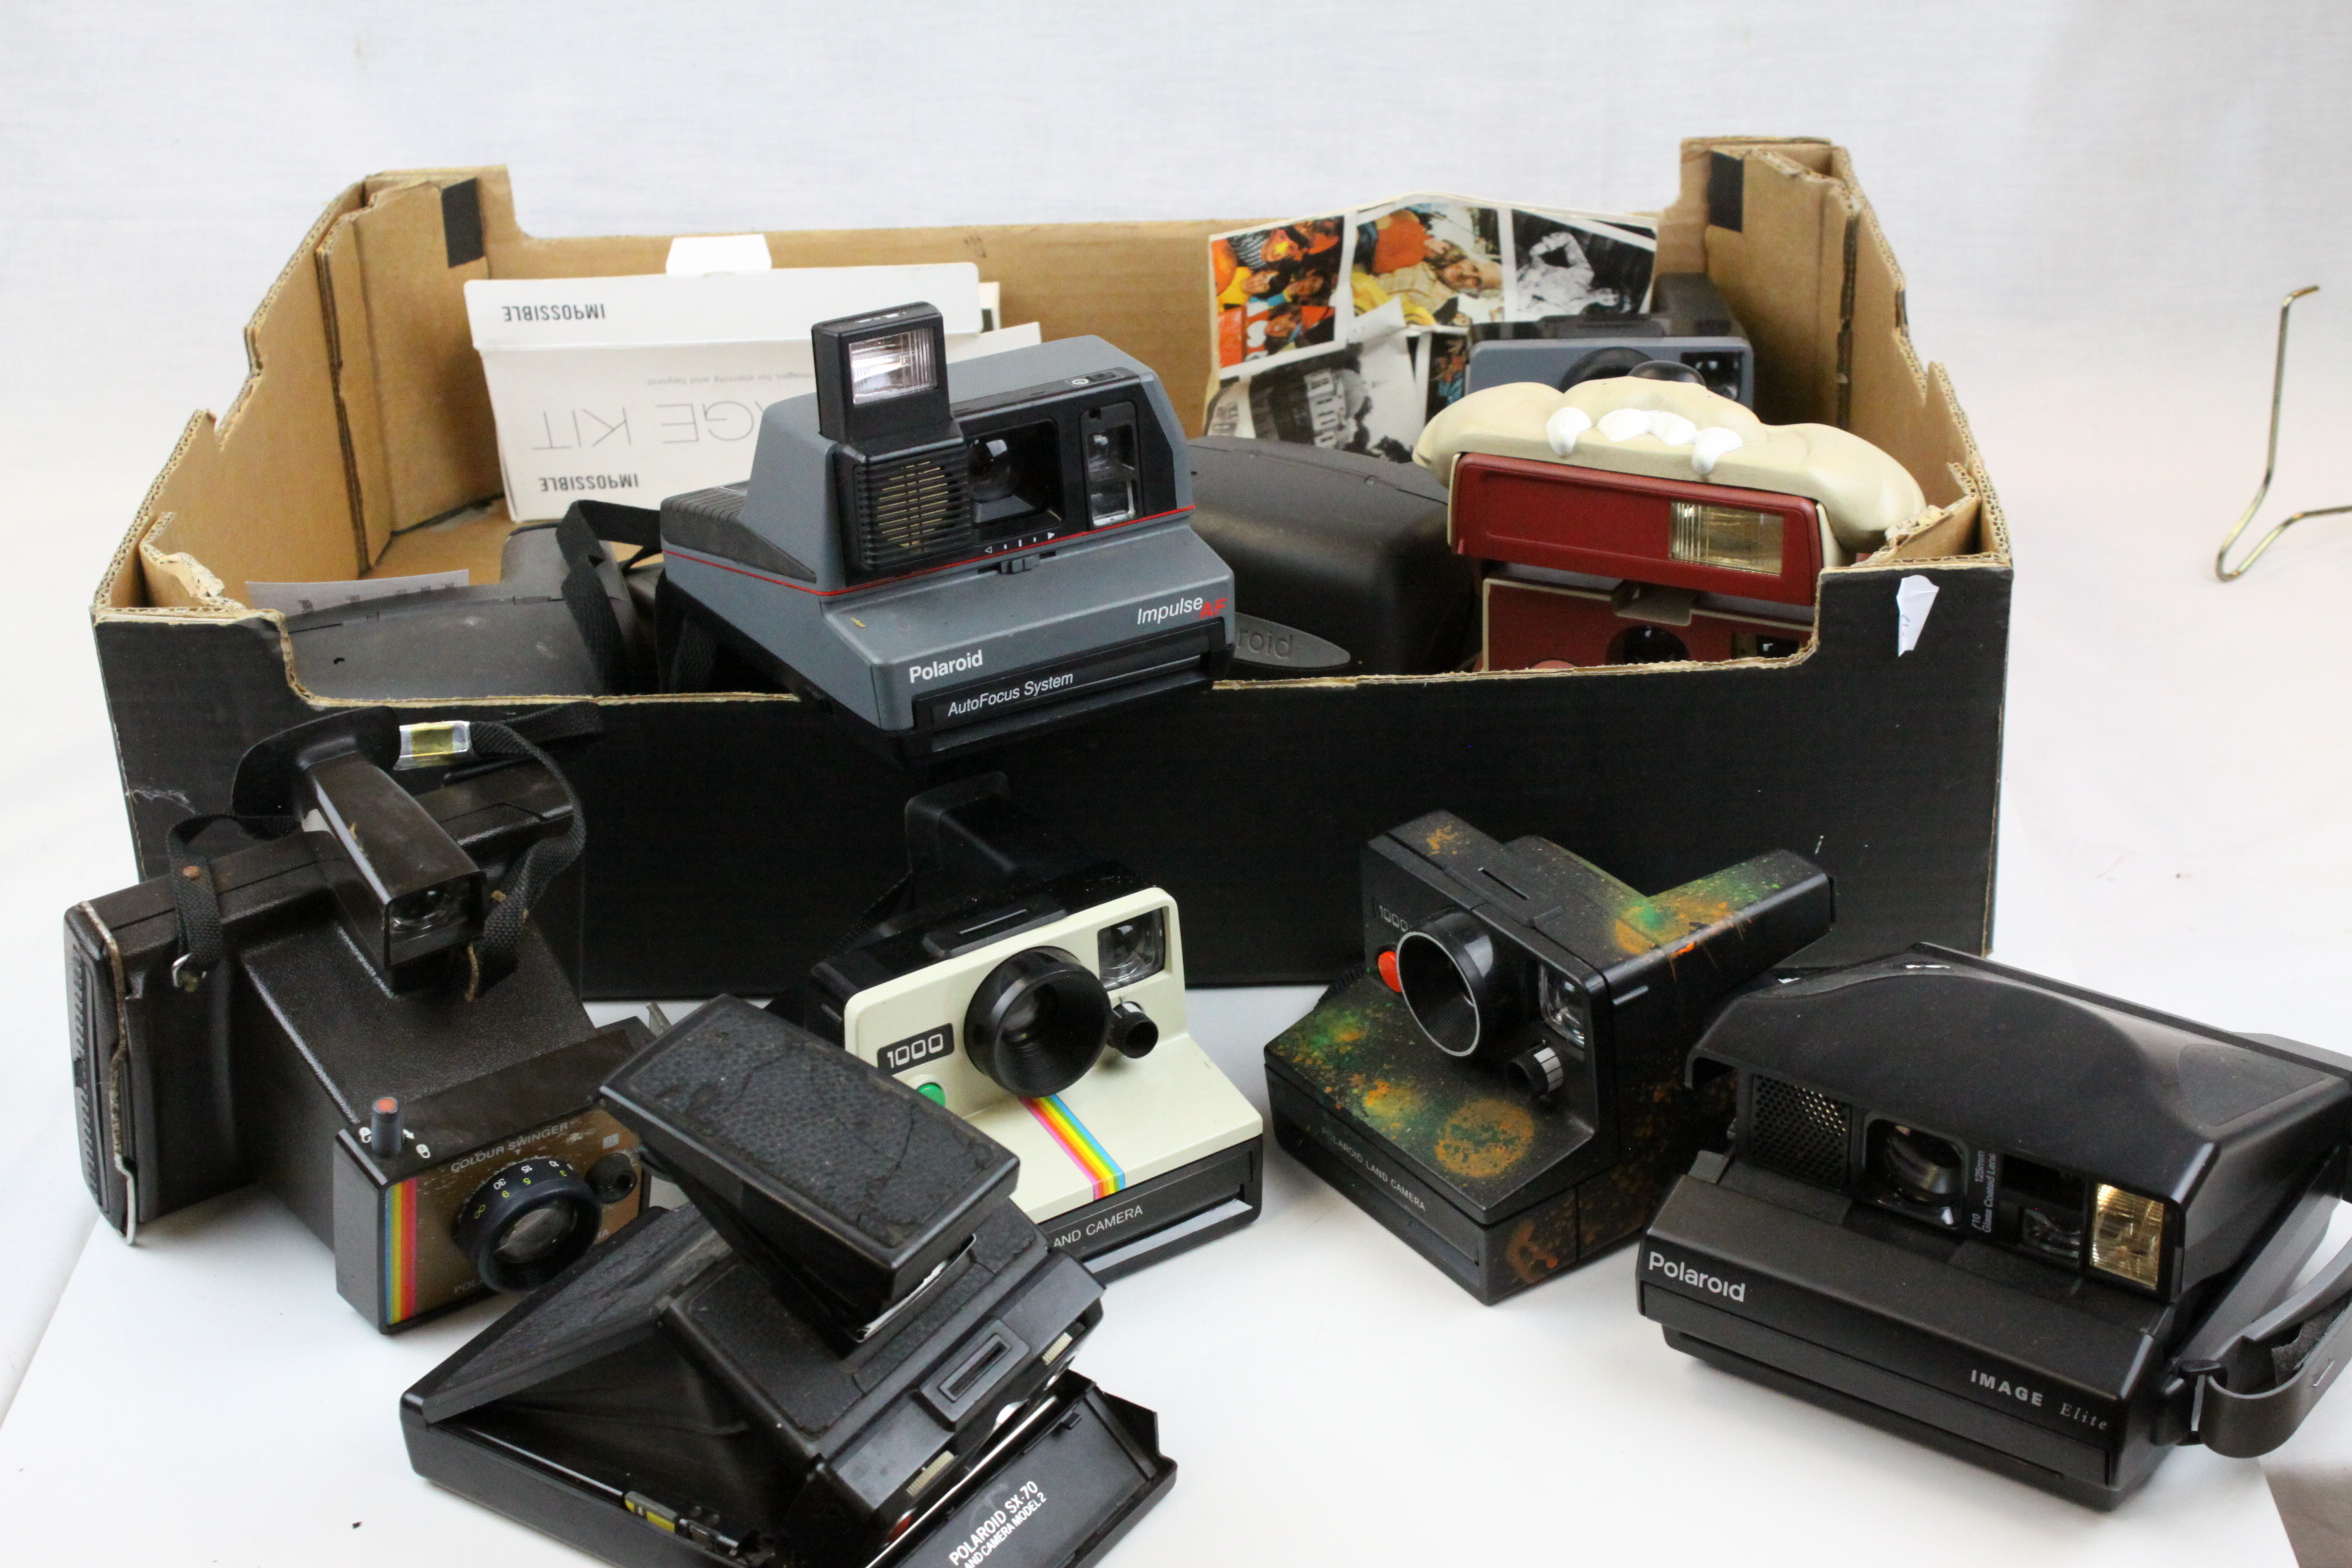 Collection of Polaroid Instant Cameras including 1000 Land Cameras, SX-70 Model 12, Impulse and